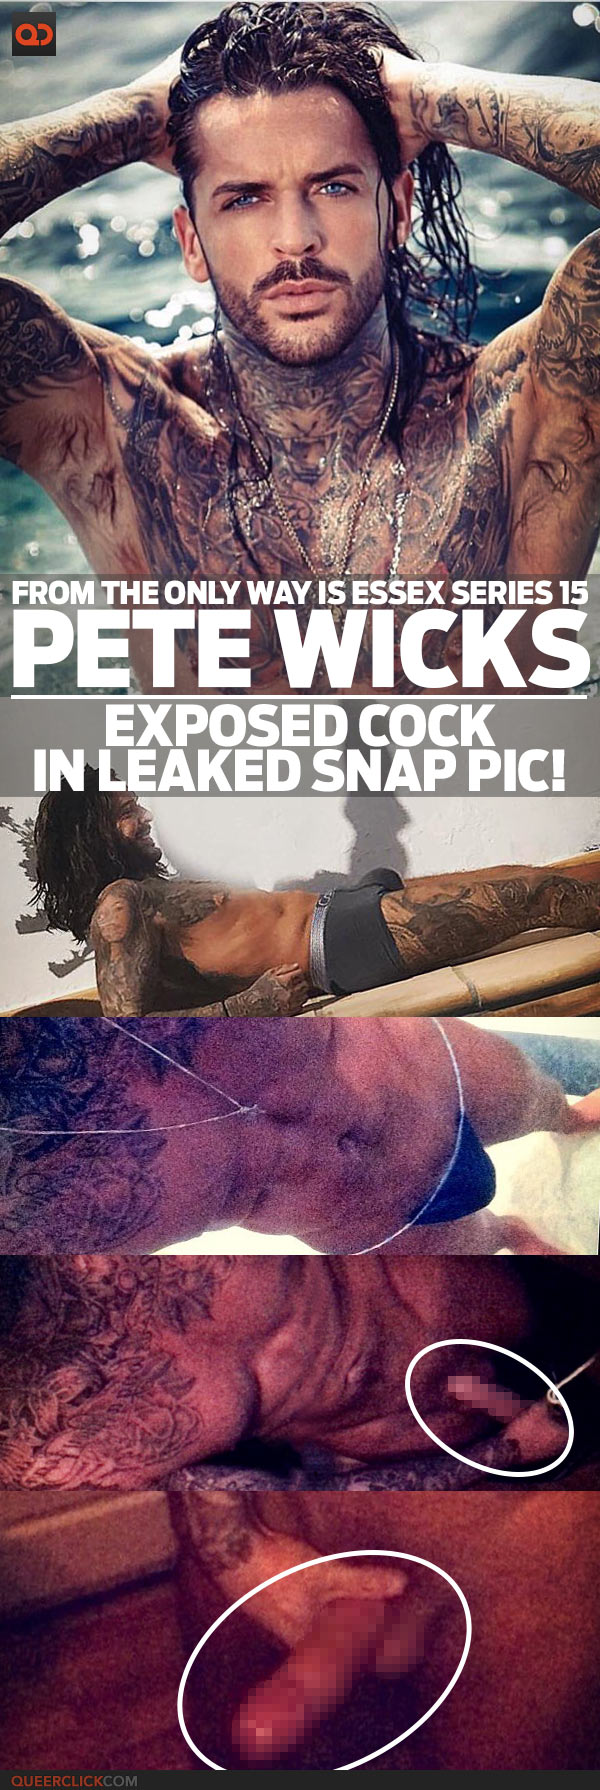 Pete Wicks, From The Only Way Is Essex Series 15, Exposed Cock In Leaked Snap Pic!